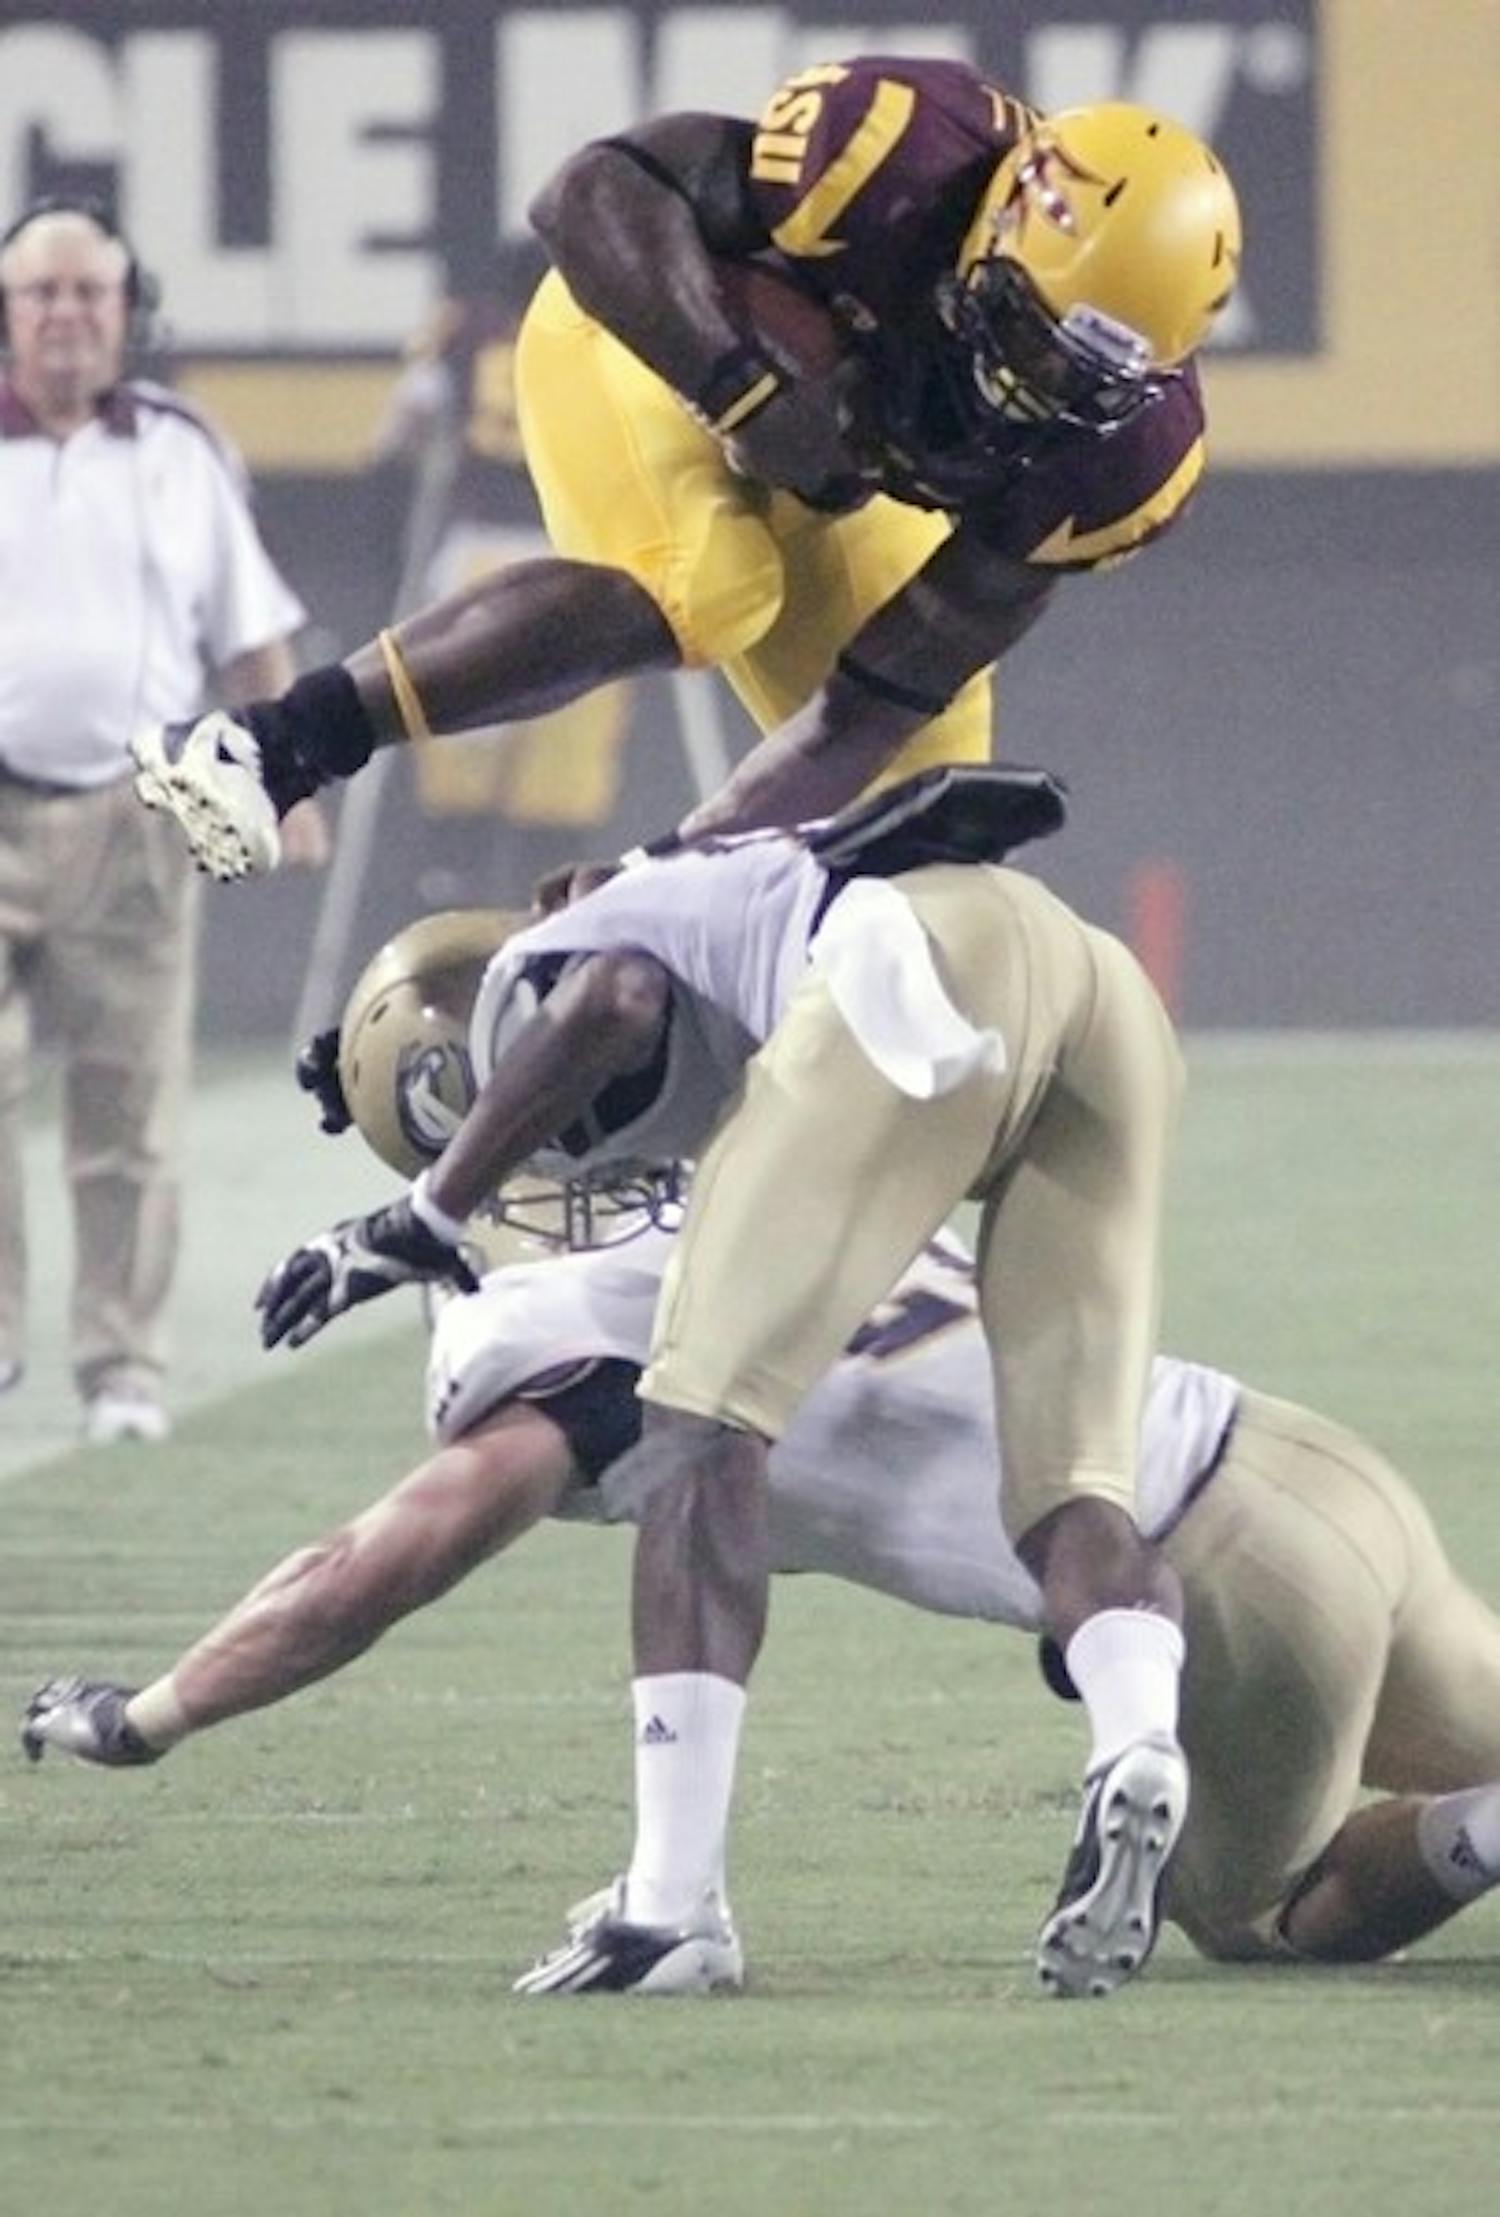 ON SPRINGS: ASU junior running back Cameron Marshall leaps over a pair of UC Davis defenders during the Sun Devils’ victory on Sept. 1. ASU is aiming to increase their tempo on offense against Mizzou. (Photo by Beth Easterbrook)